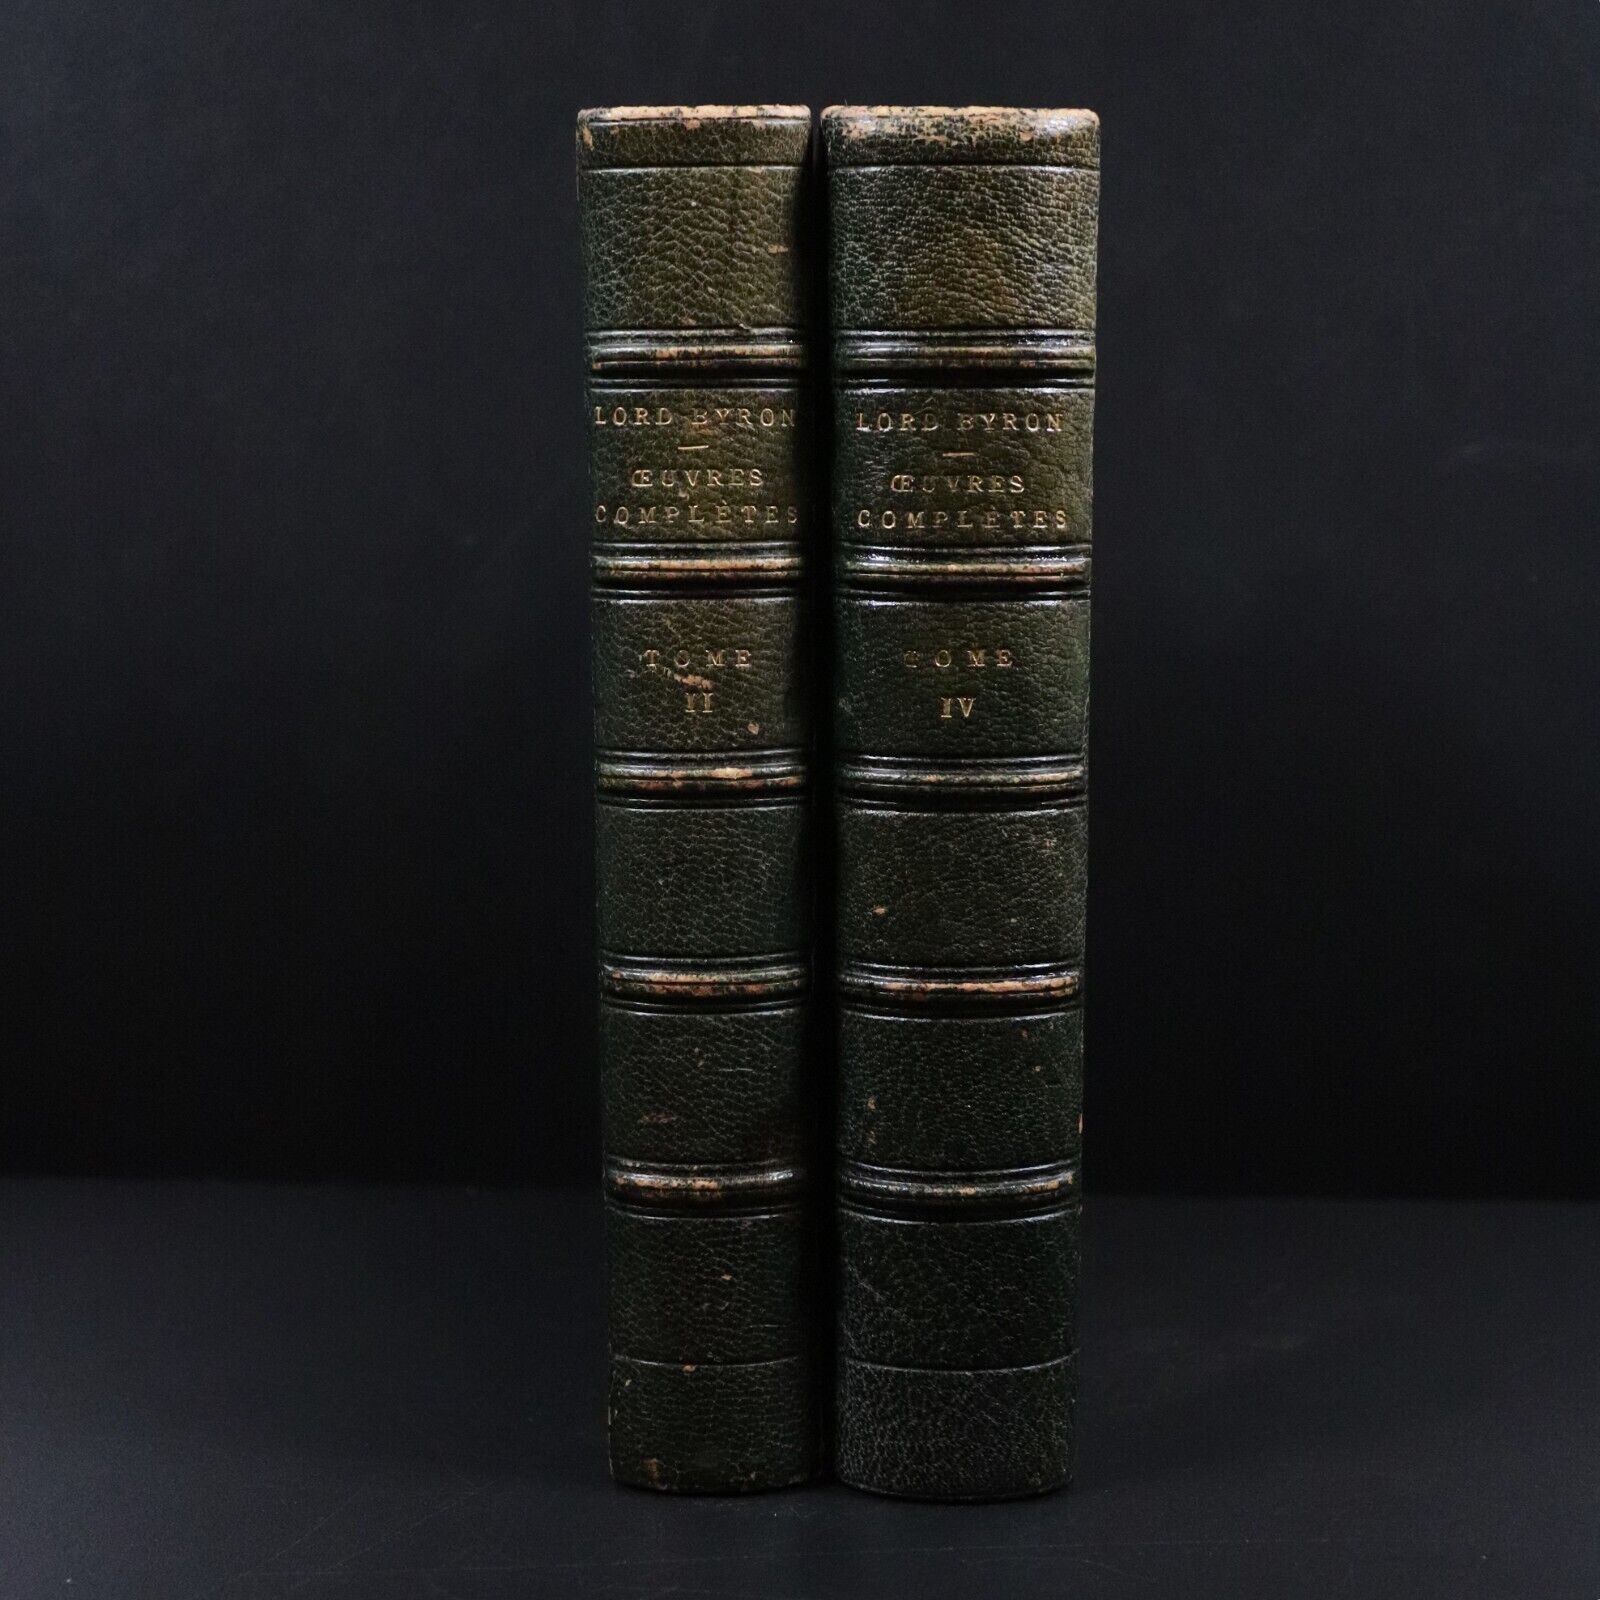 1877 2vol Oeuvres Completes De Lord Byron Antiquarian French Books Fine Binding